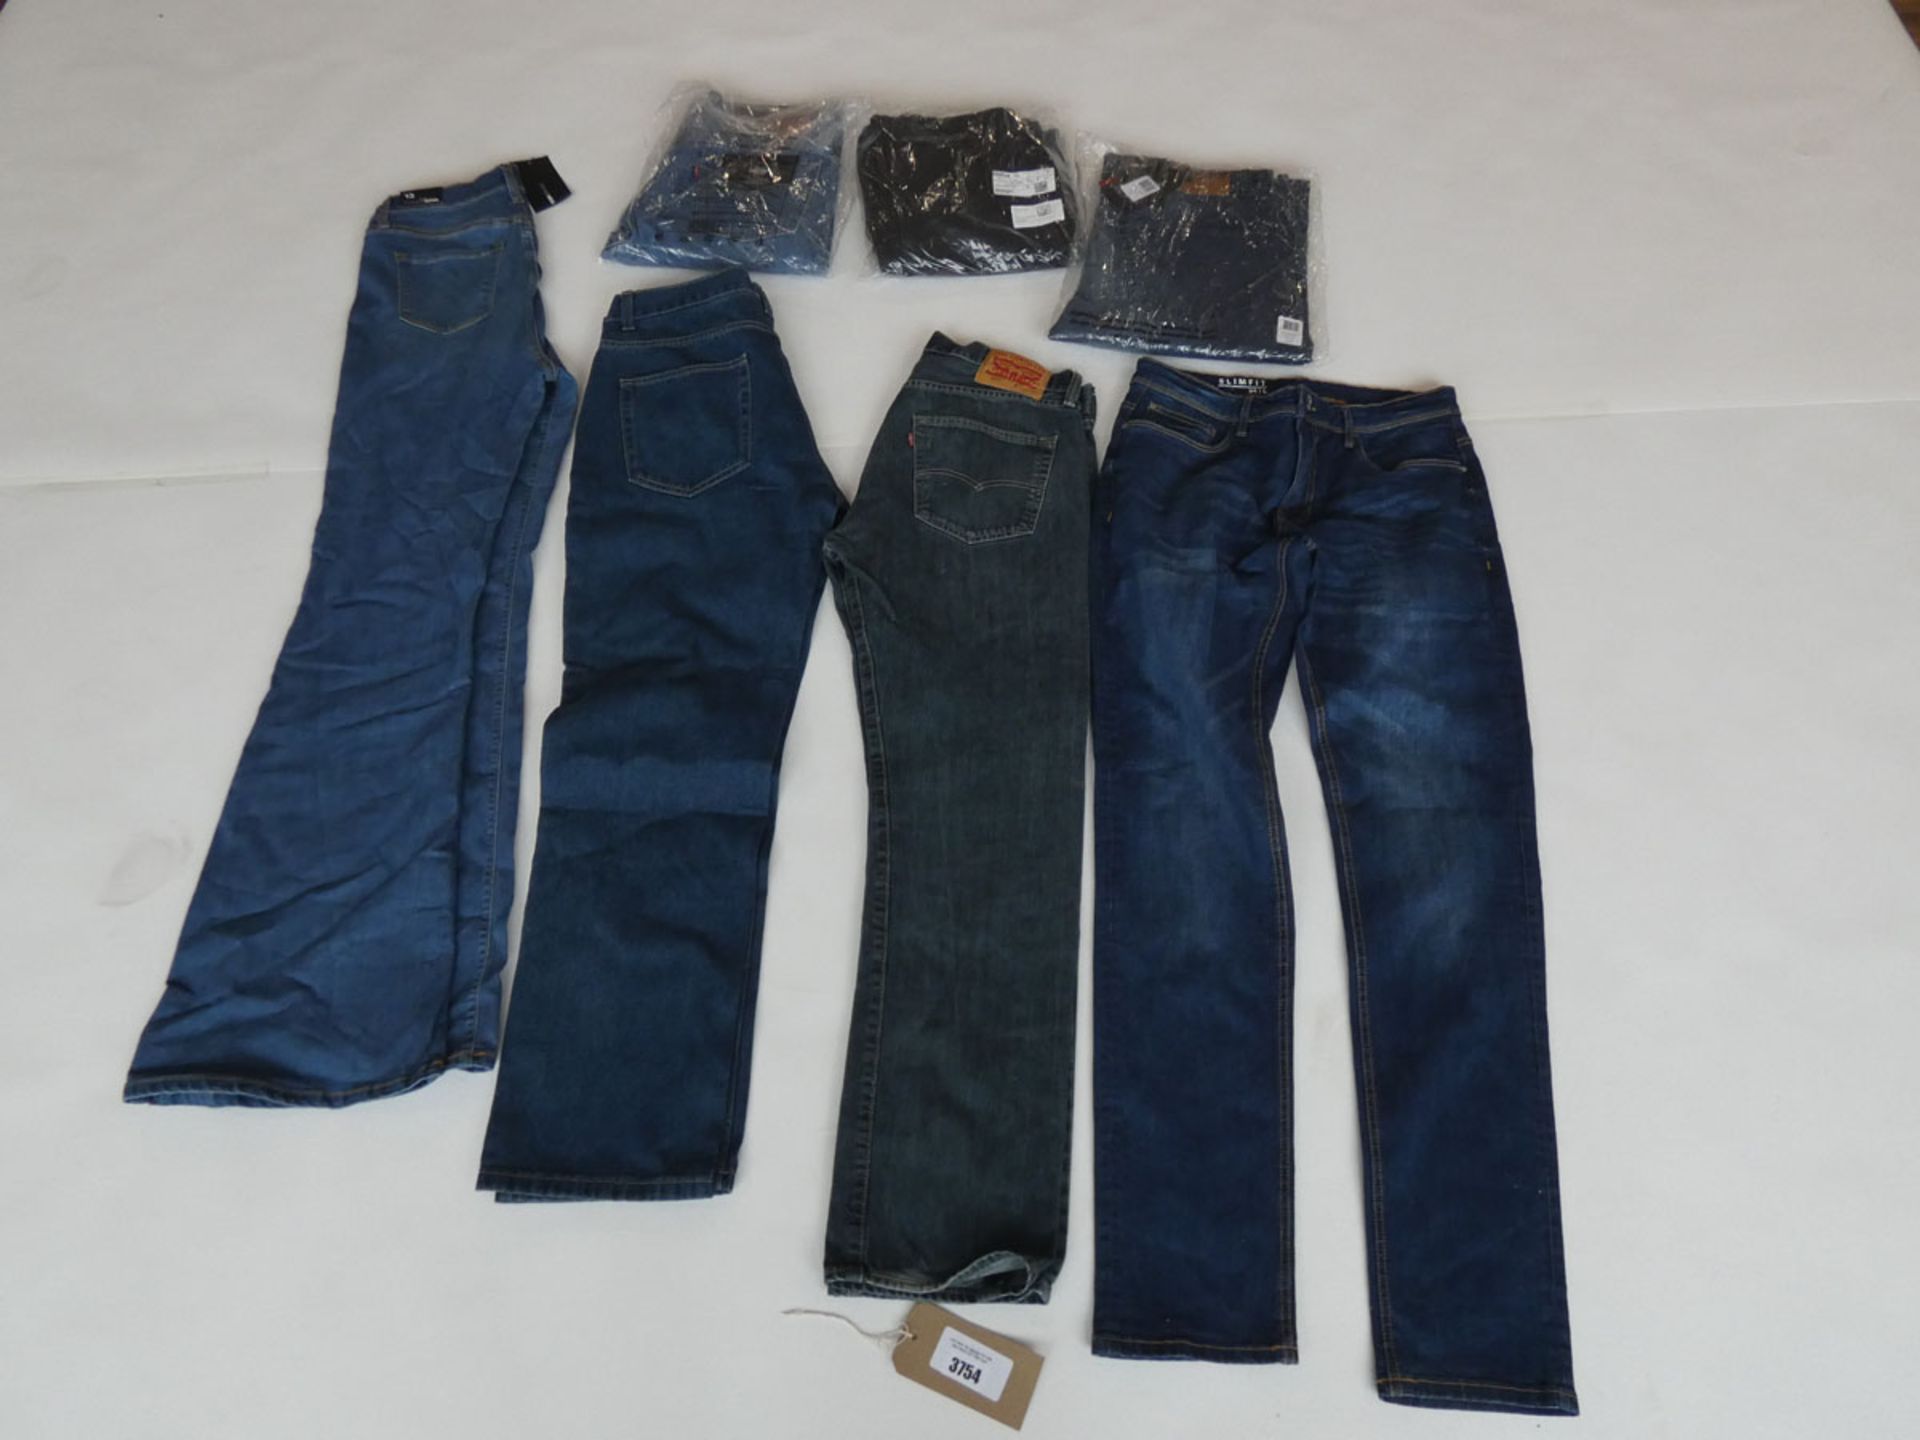 Large selection of denim wear to include Fashion Nova, Levis, etc in various sizes